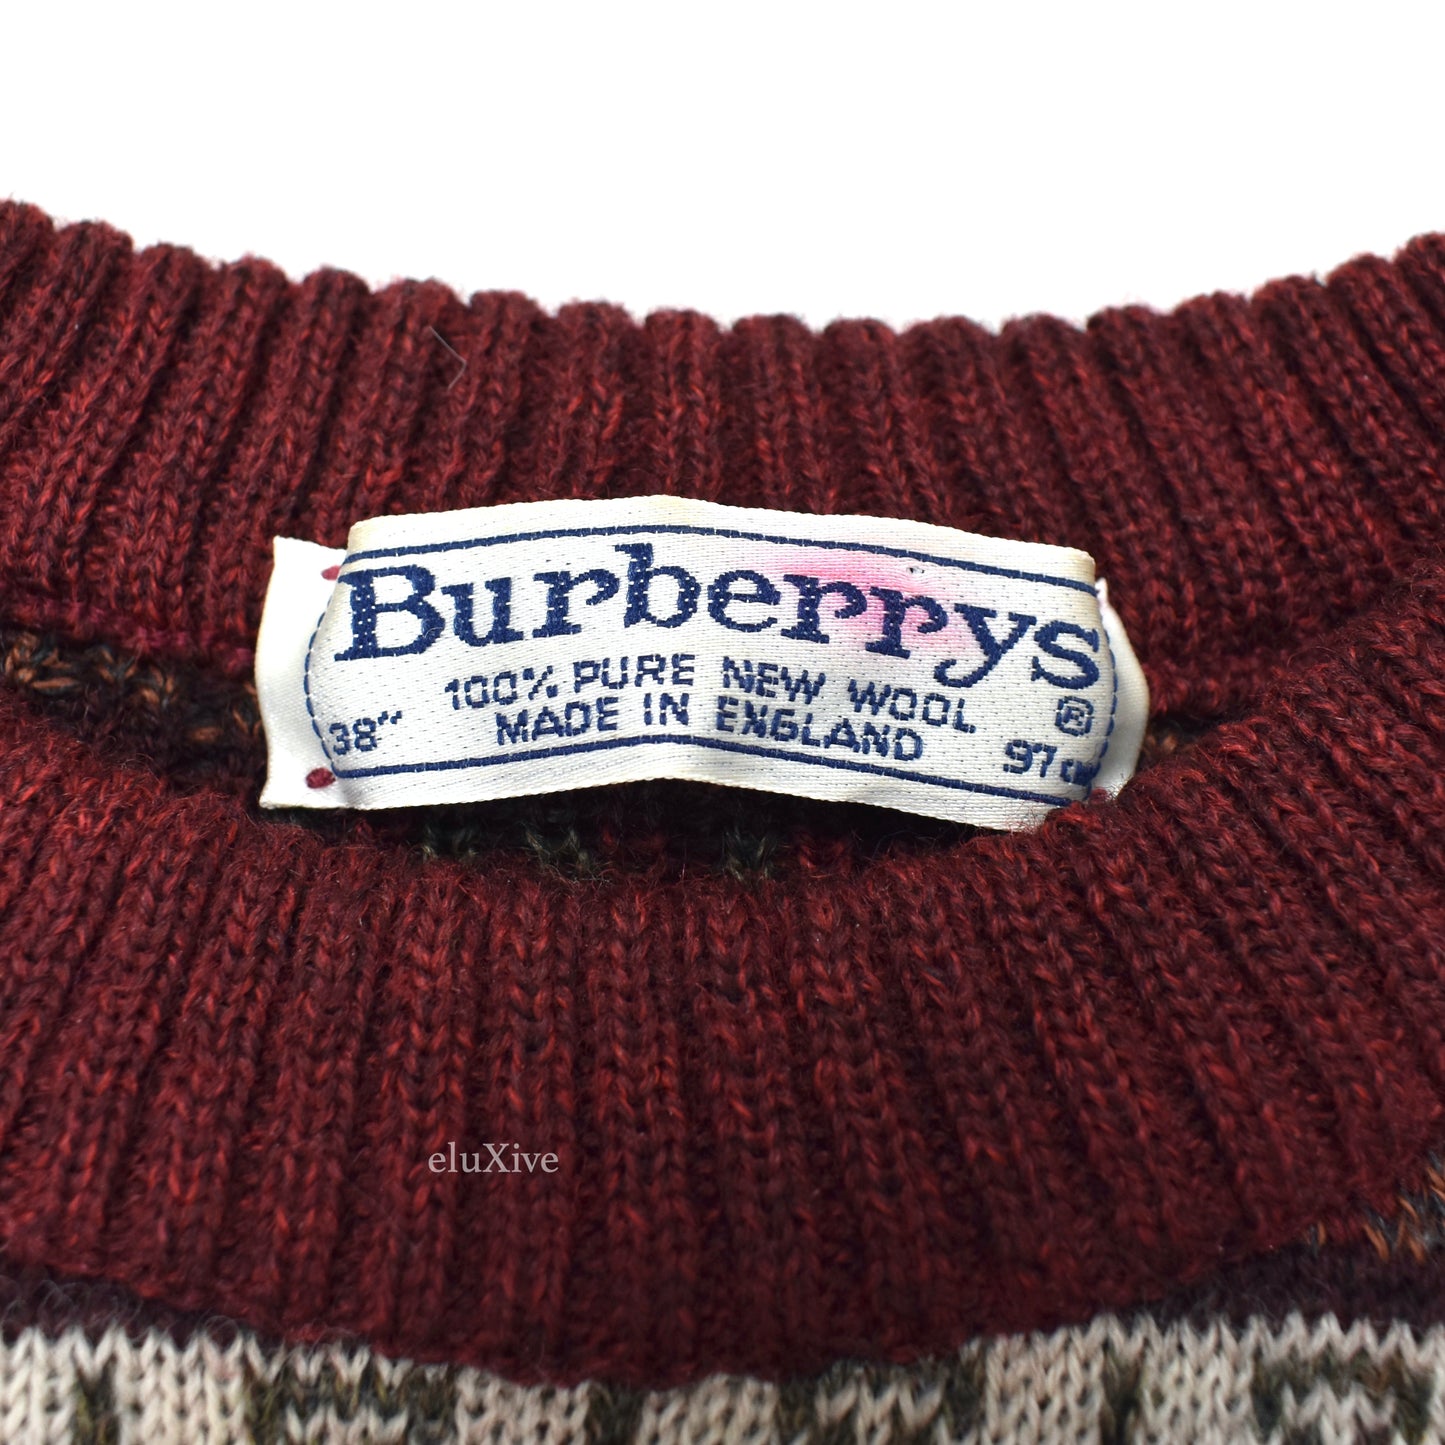 Burberry - Vintage Golf Course Logo Knit Sweater (Red)